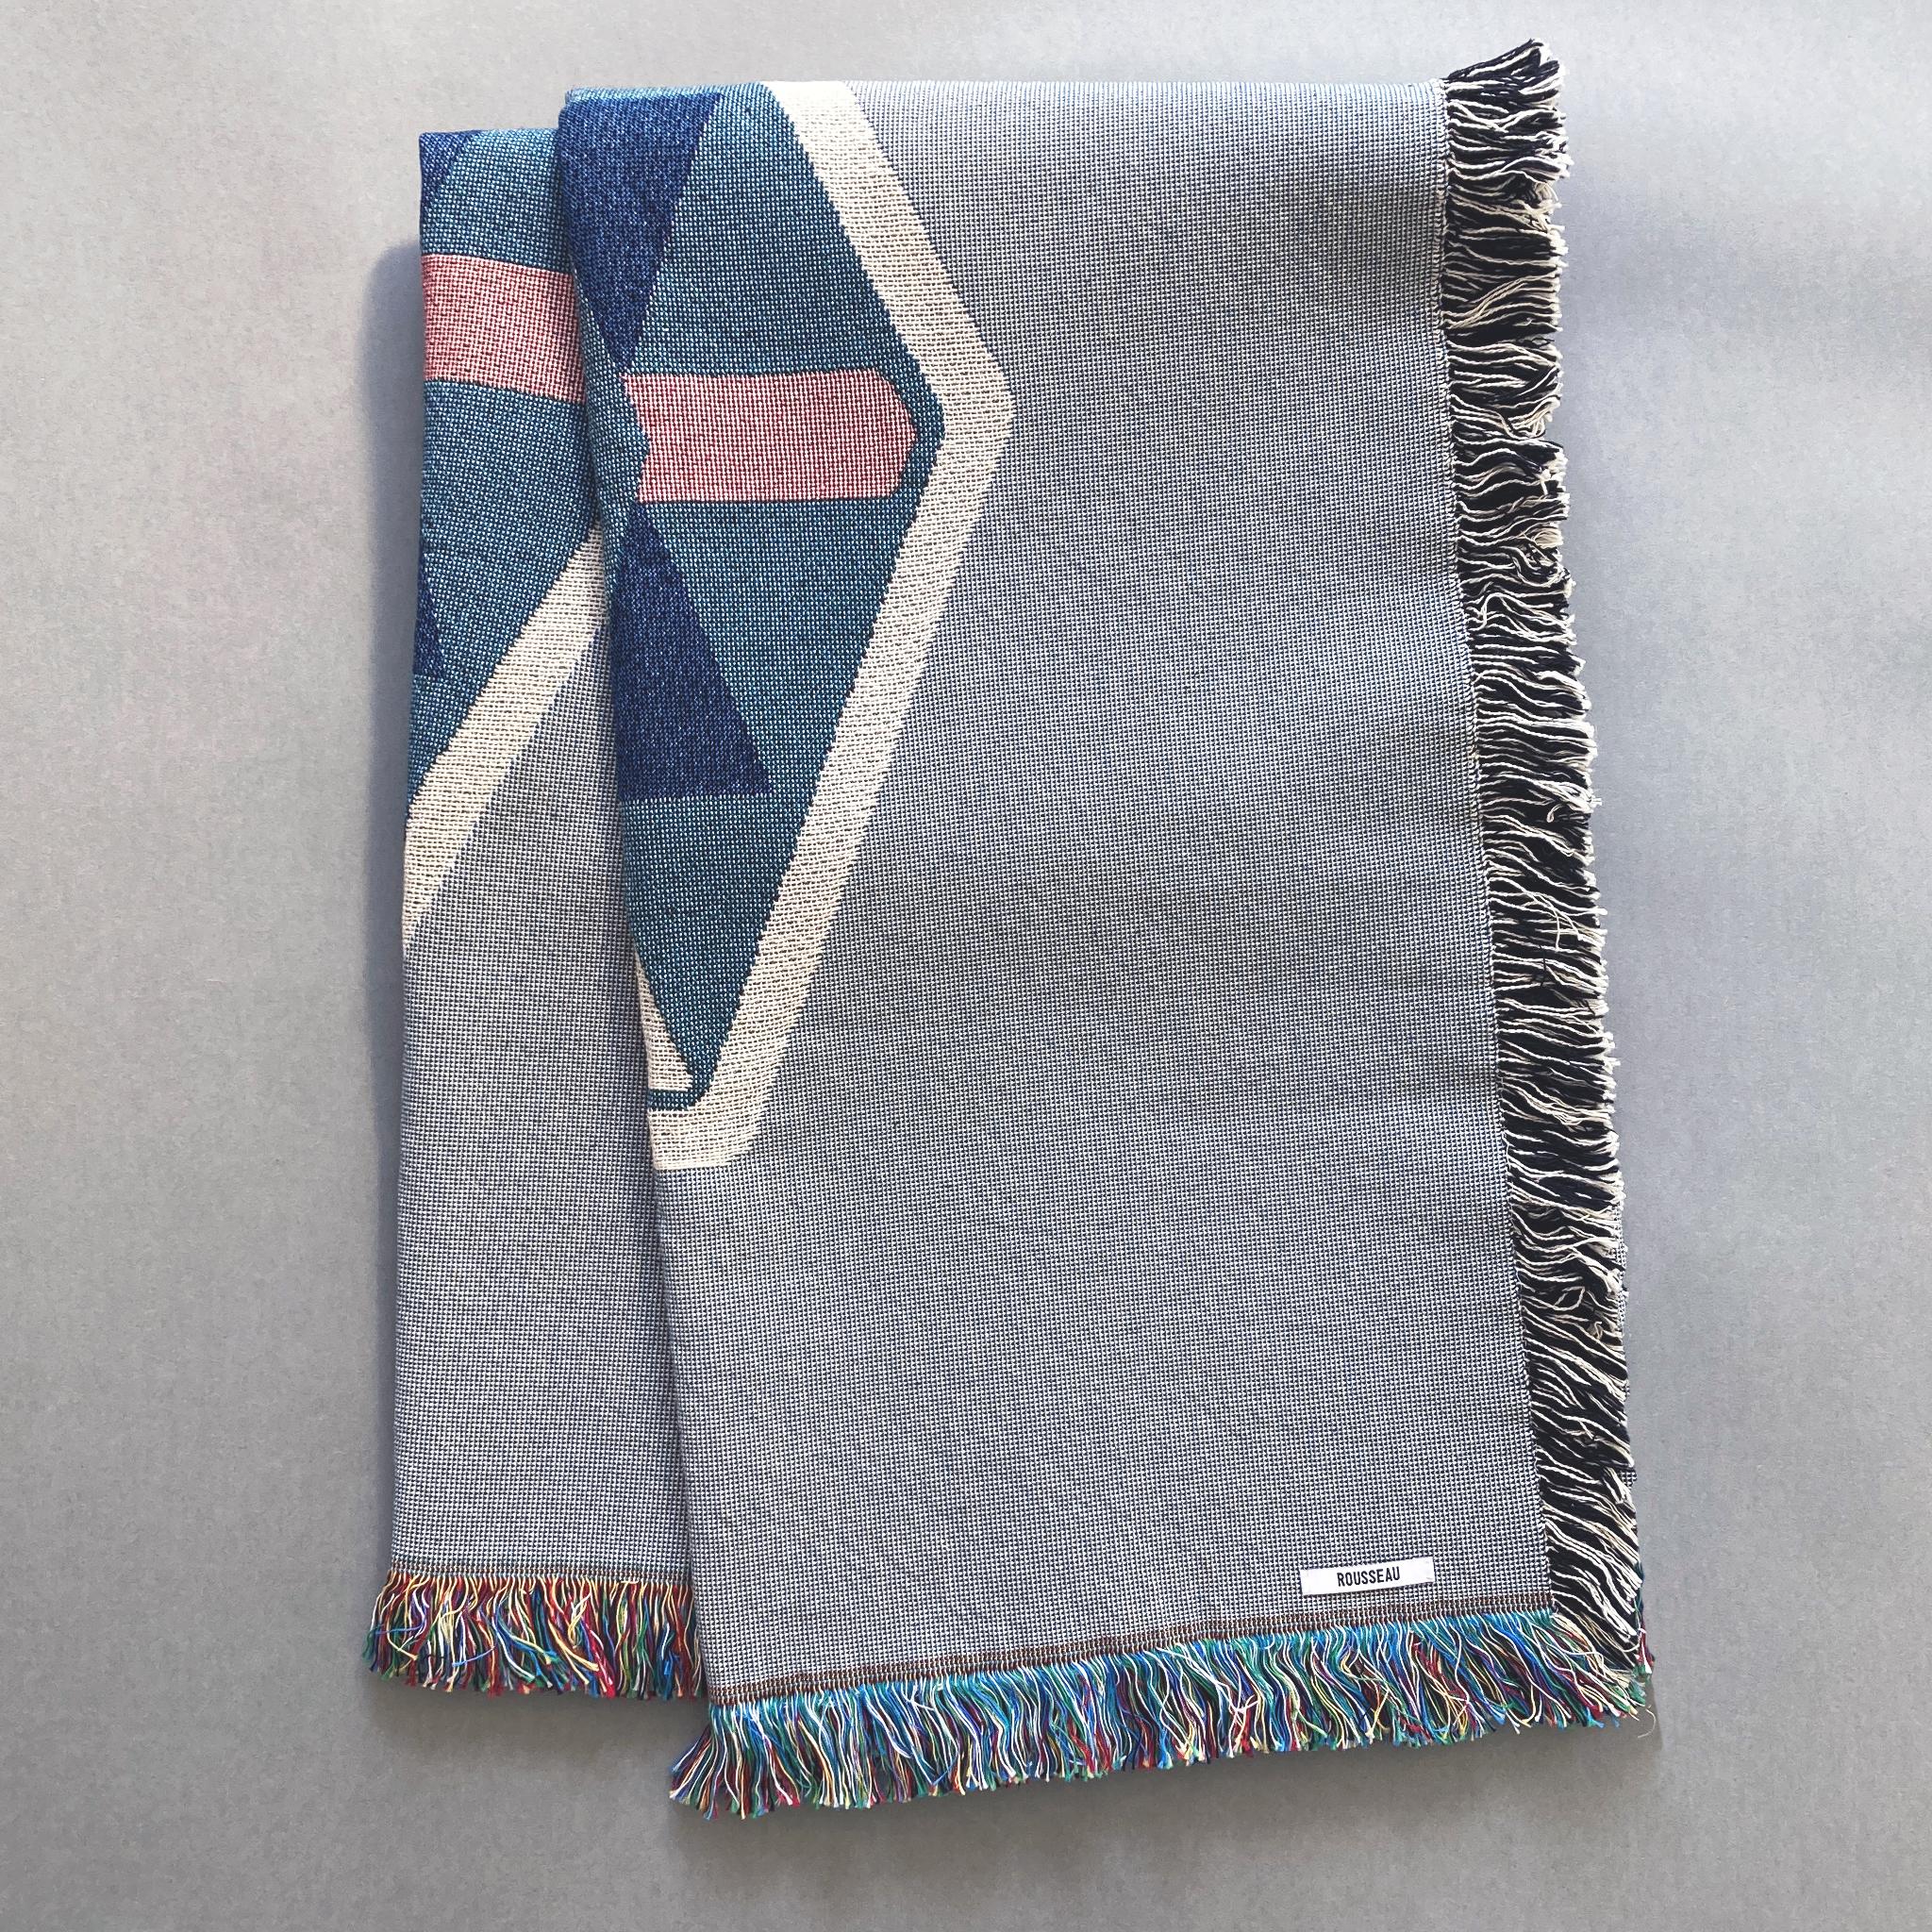 The Fog Gray Geo throw, petite size, perfect for toddlers or kids. Gray, pink, ochre and navy geometric print woven throw with fringe edge. Woven with recycled cotton on a jacquard loom, made in the US. Each throw measures 40 x 54 inches.

This